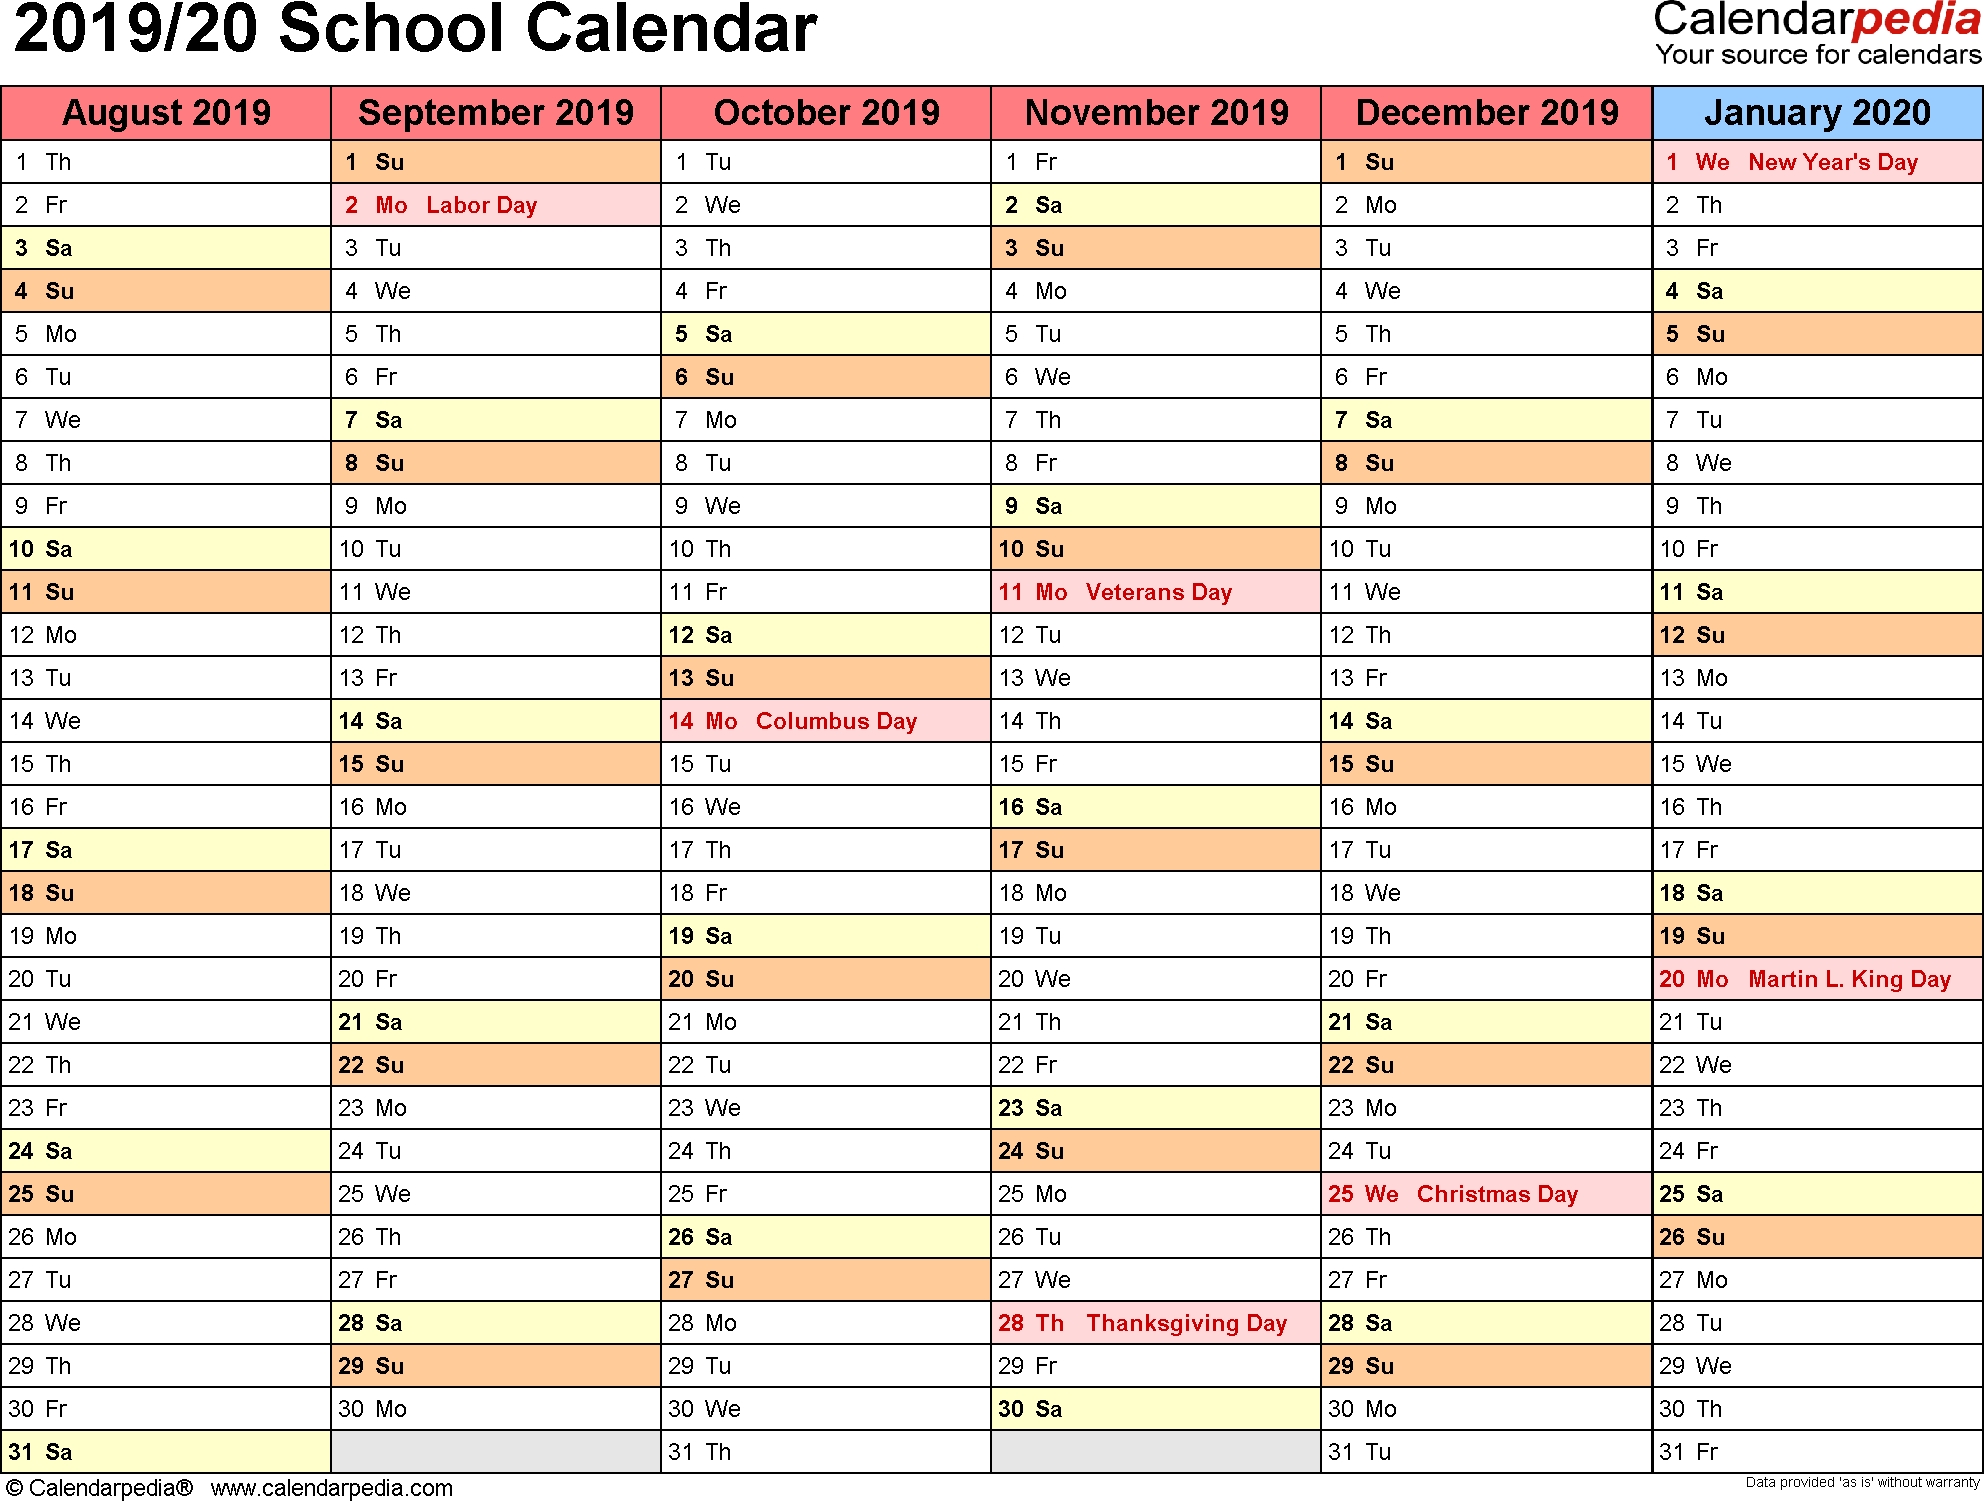 School Calendars 2019/2020 As Free Printable Excel Templates for List Dates Spreadhsheet For 2019-2020